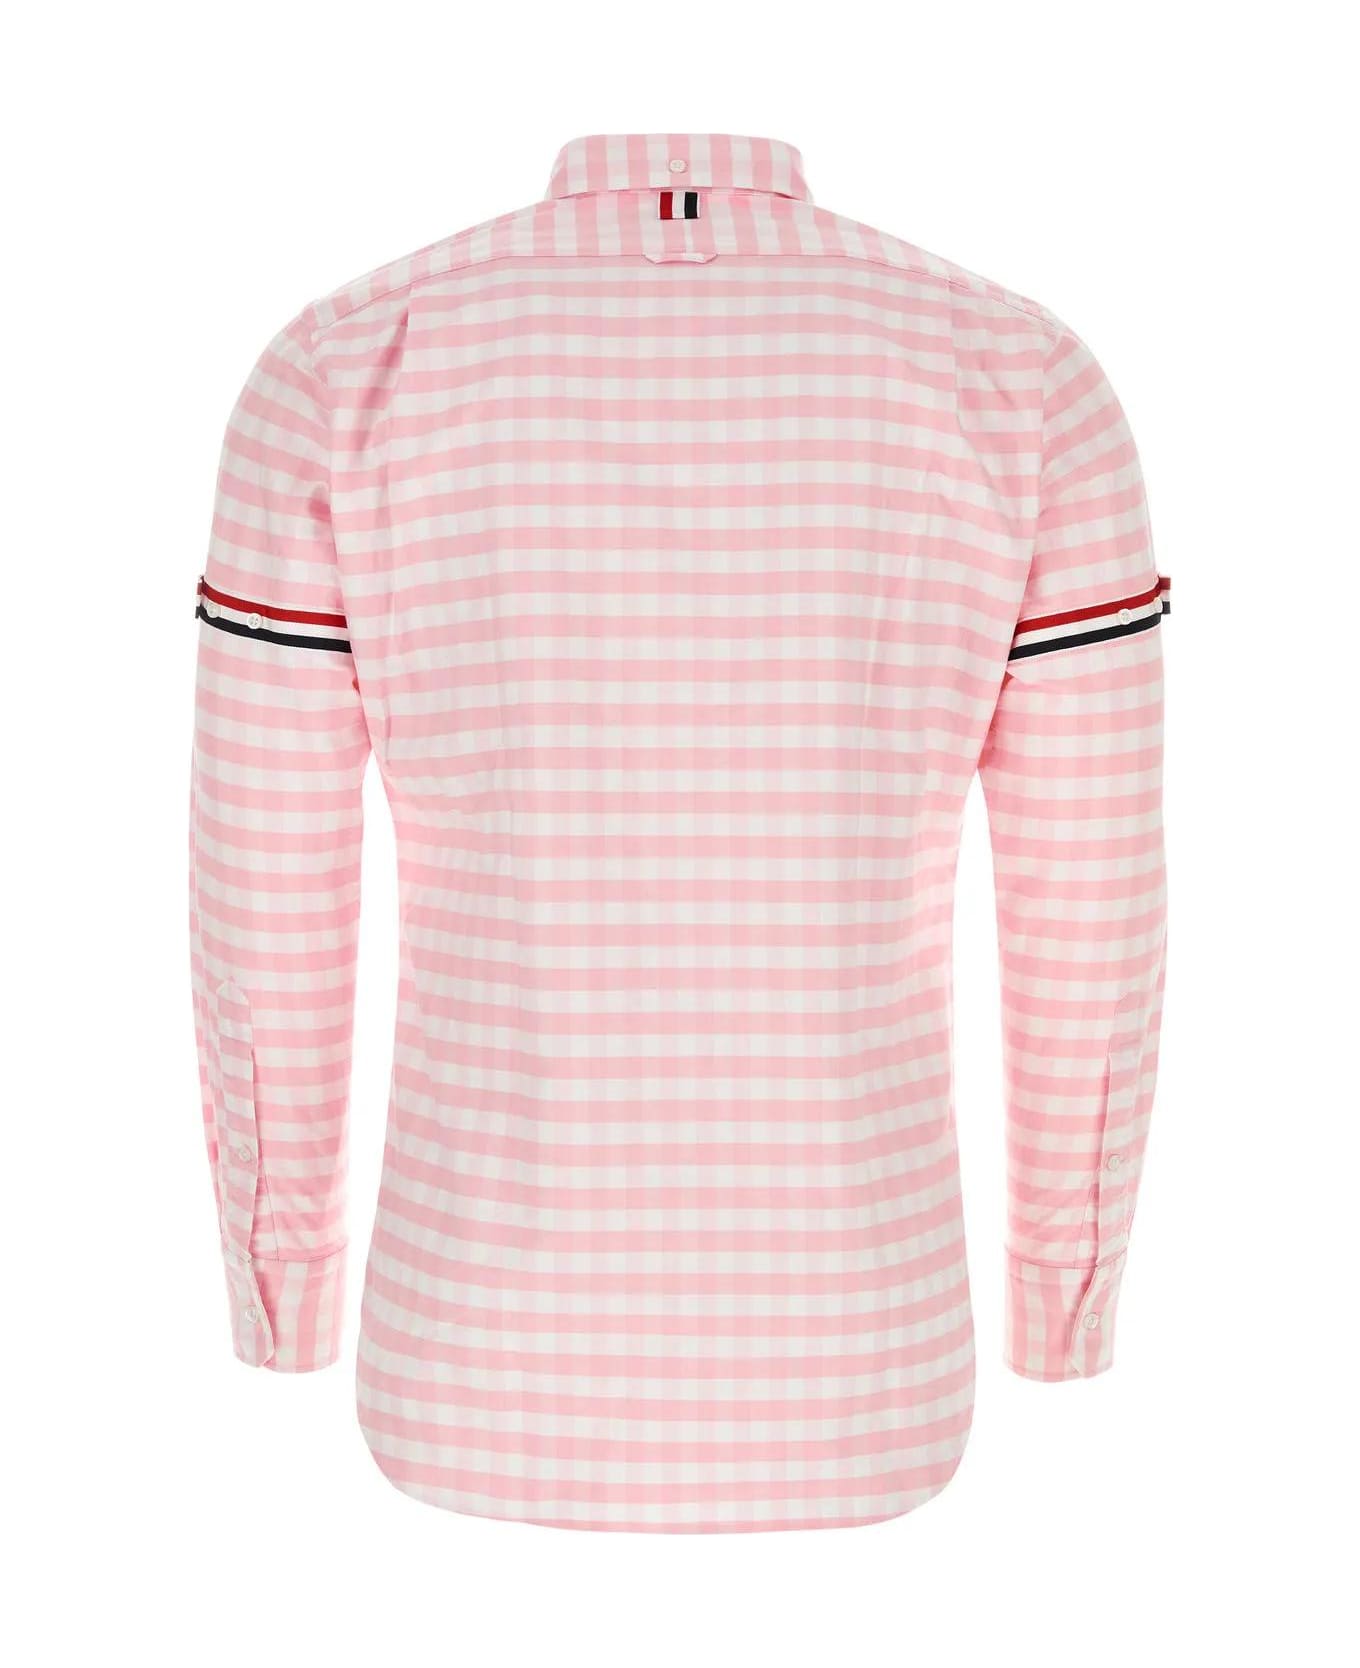 Thom Browne Embroidered Oxford Shirt - Pink